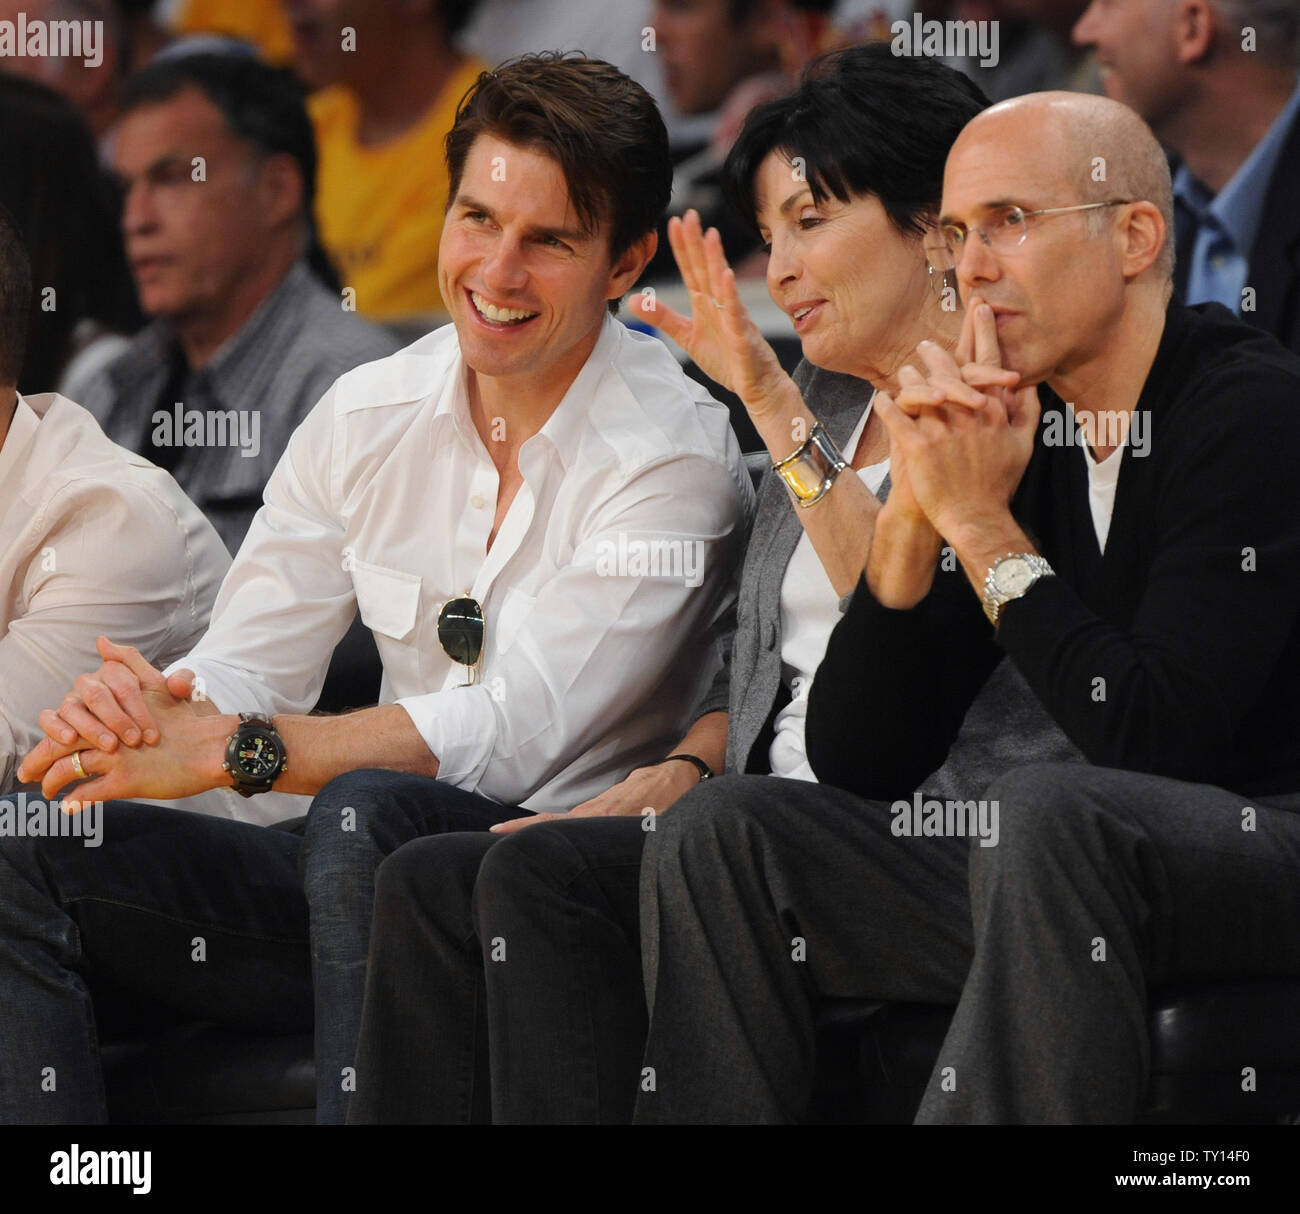 Actor Tom Cruise (L) sits courtside as he attends  Game 2 of the Los Angeles Lakers vs Denver Nuggets NBA Western Conference finals with Jeffrey Katzenberg and his wife Marilyn at Staples Center in Los Angeles on May 21, 2009. The Nuggets defeated the Lakers 106-103 to tie the best-of-seven series 1-1. (UPI Photo/Jim Ruymen) Stock Photo